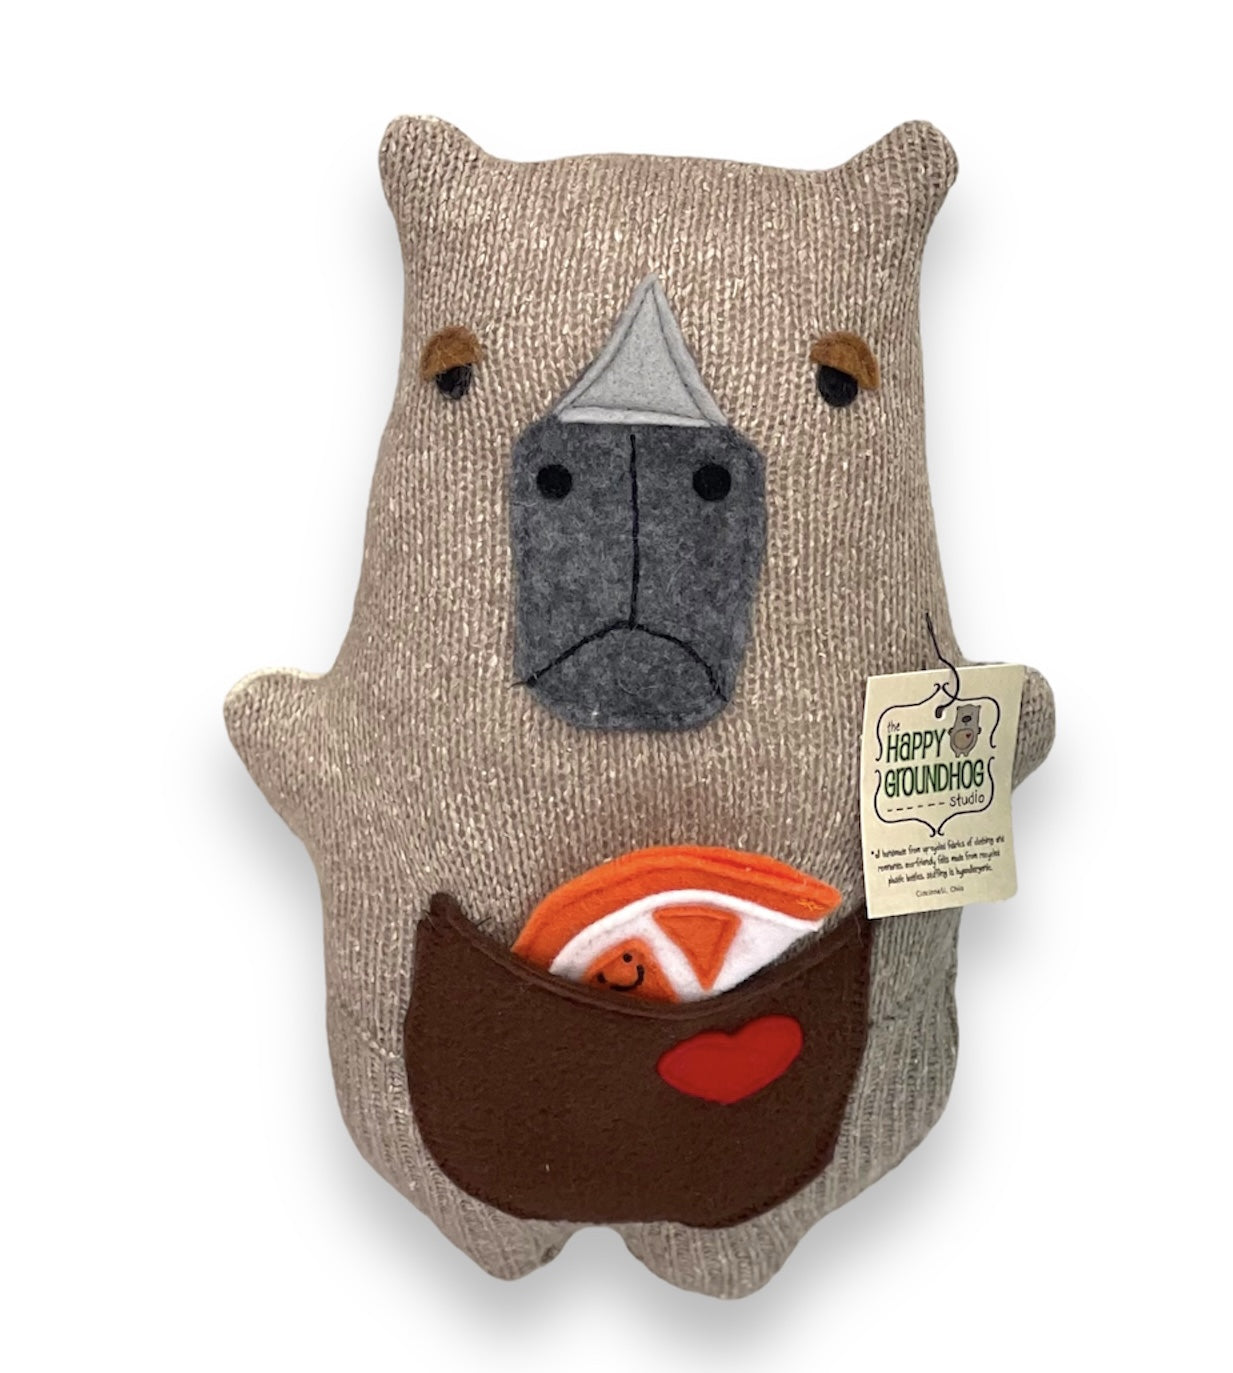 Capybara Stuffed animal with a felt orange slice in its front pocket. Handmade stuffed animal from recycled sweaters